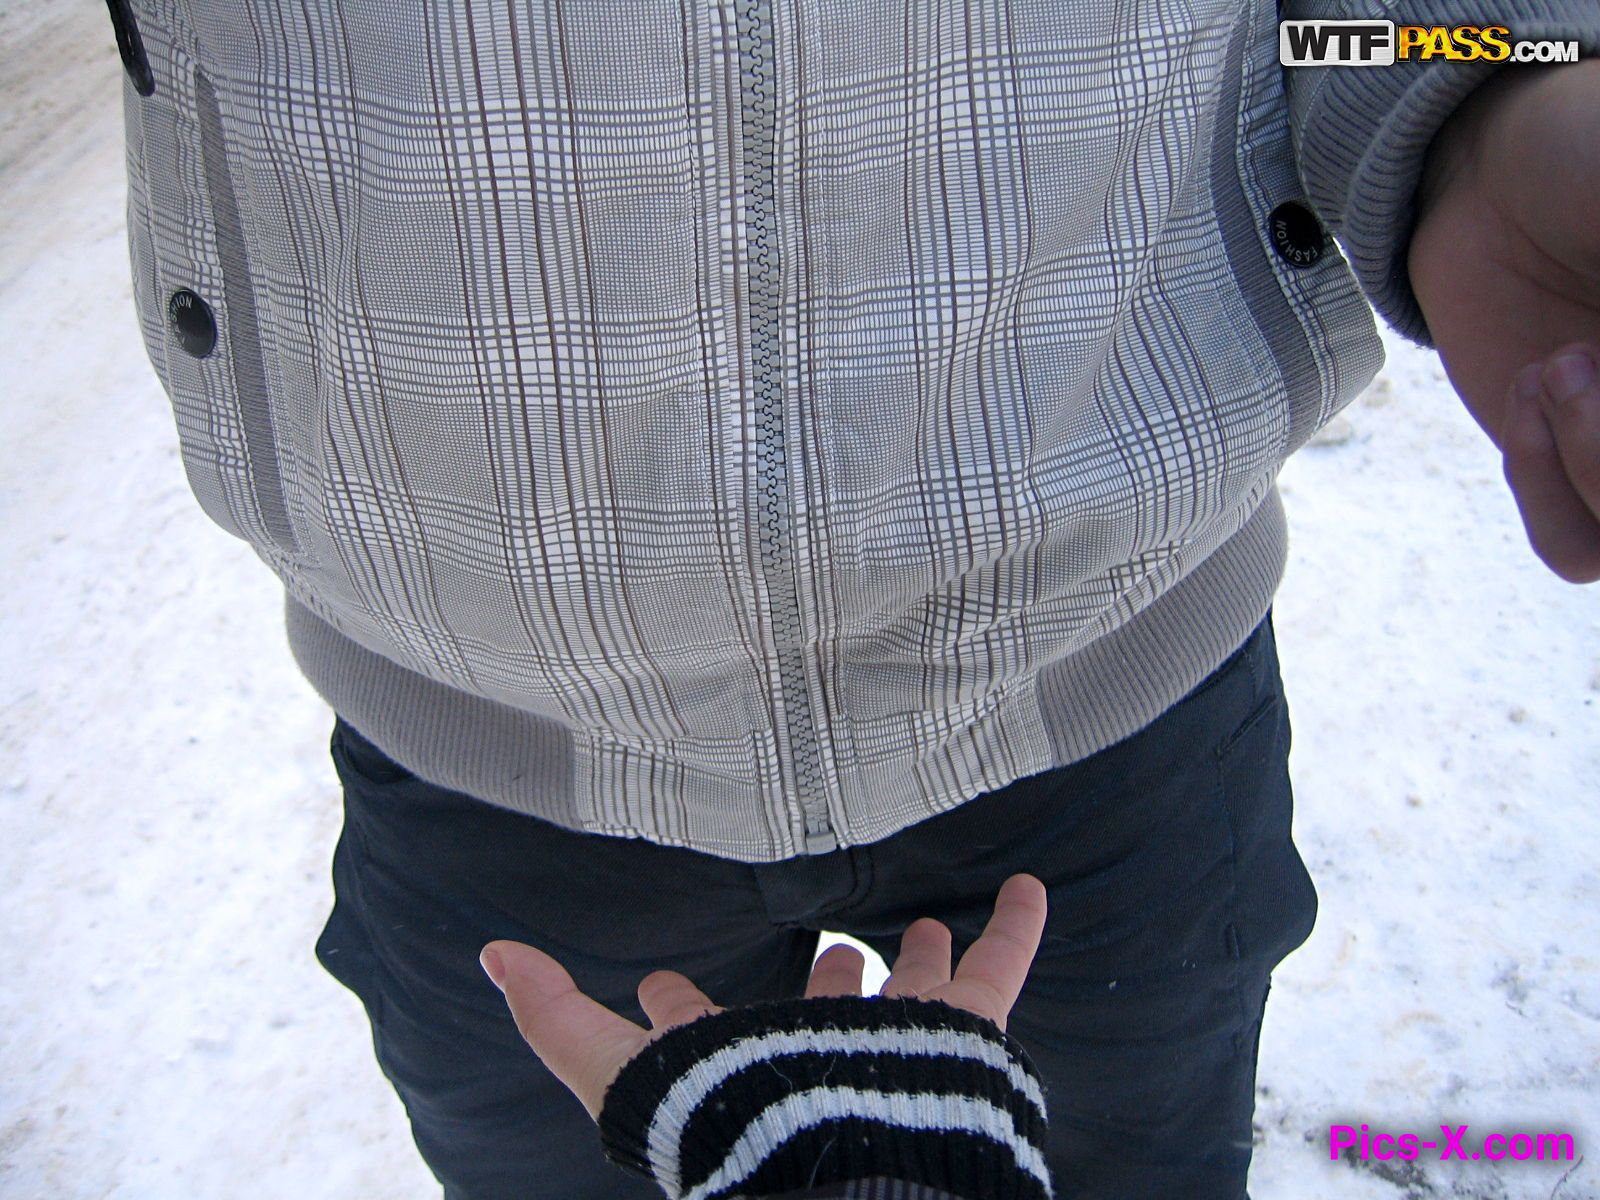 Fantastic girlfriends sex in snow - Private Sex Tapes - Image 5